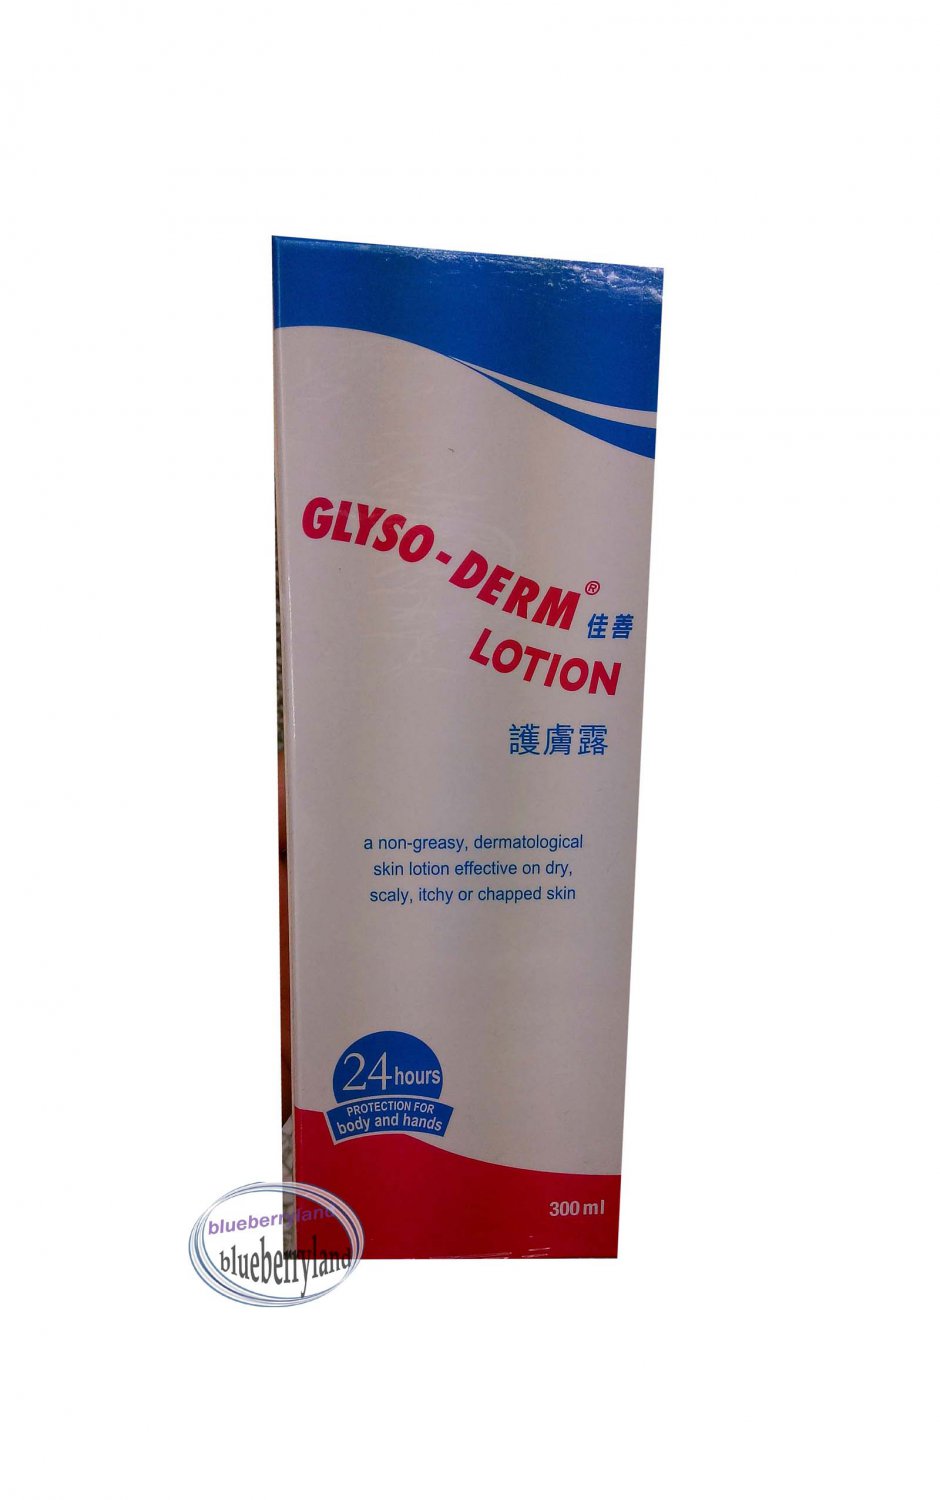 Glyso Derm Lotion 300ml Skin Care For Dry Scaly Itchy Chapped Skin